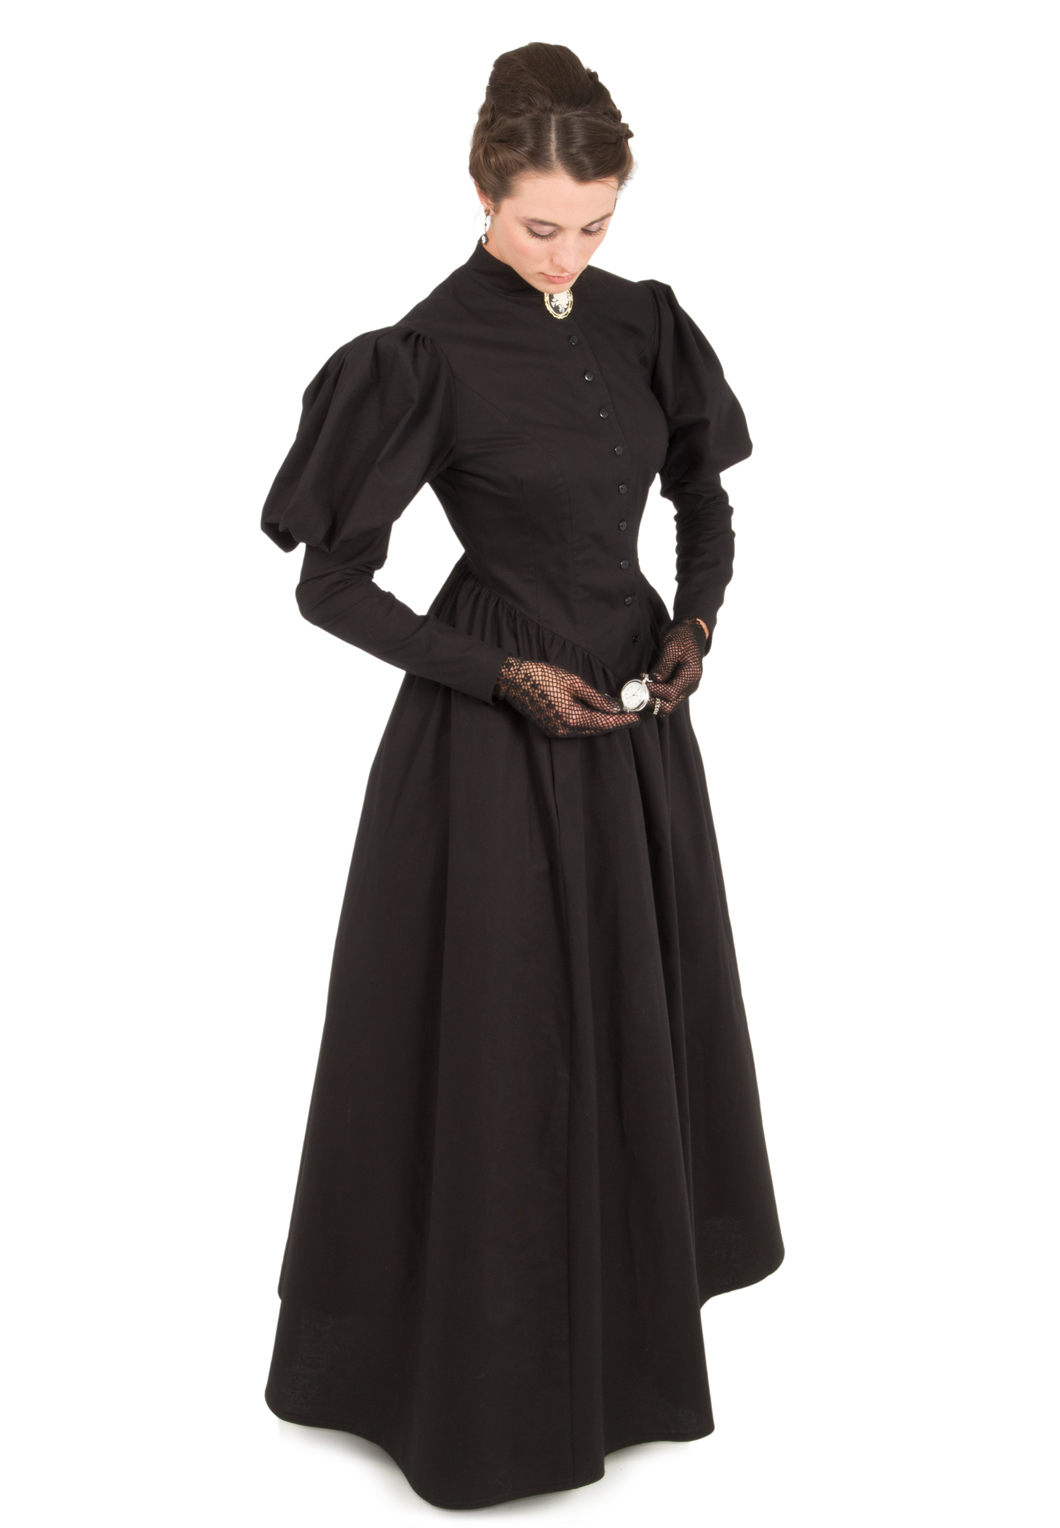 Mourning Gown - in stock